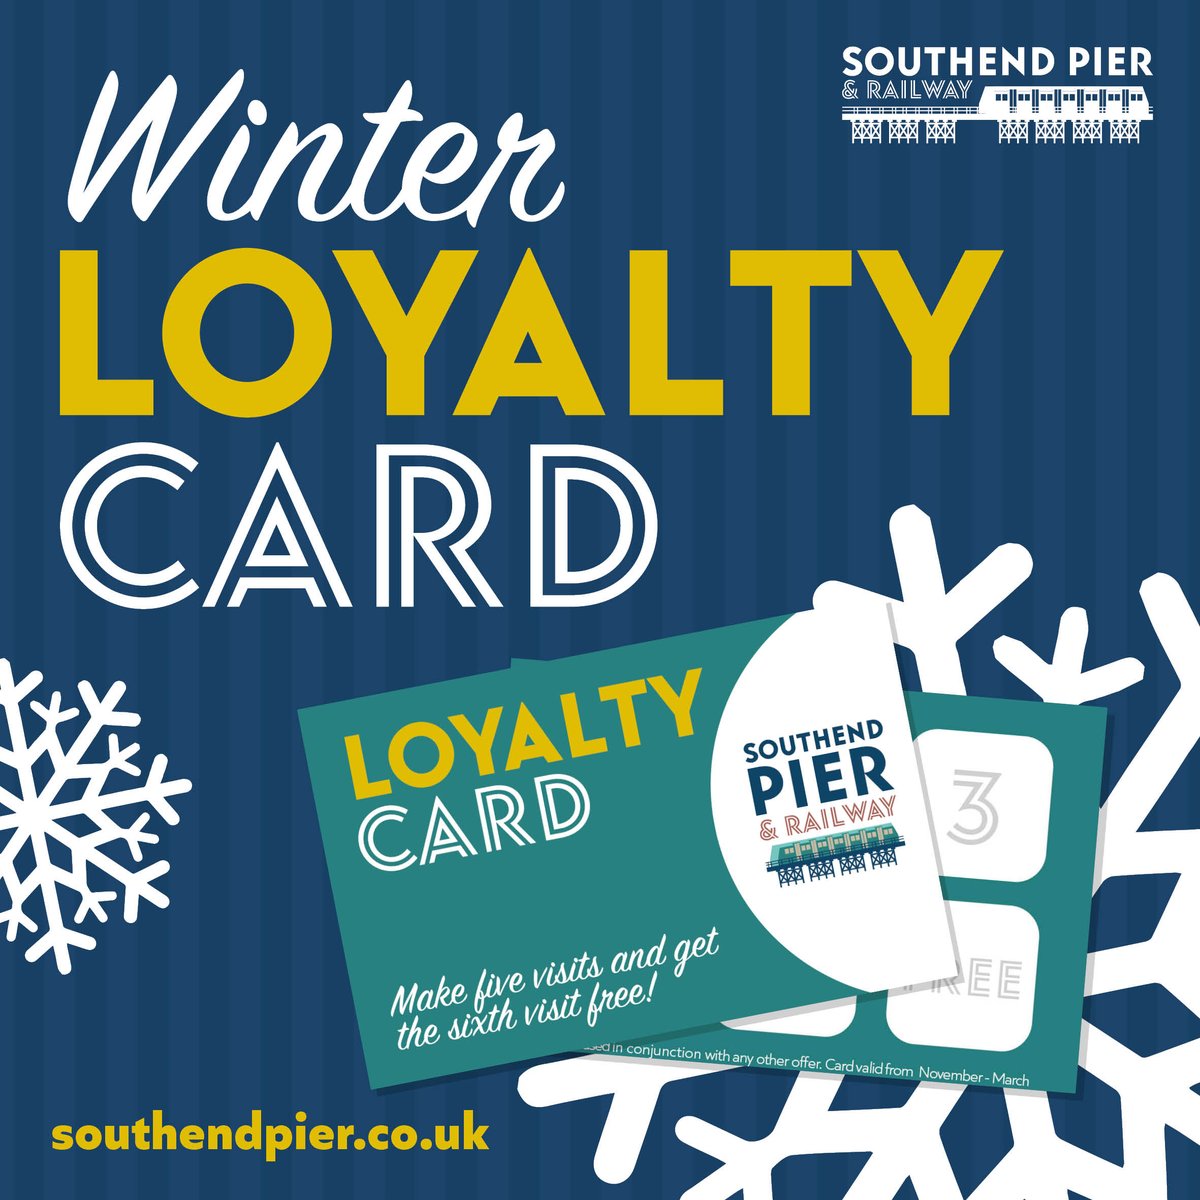 ❄ SOUTHEND PIER WINTER WALK ❄ Collect a Winter Loyalty Card next time you take a walk on @southend_pier this winter, enjoy 5 pier strolls and the 6th will be FREE! Winter Walks cost just £1 ❄️ Plan your next visit 👉 southendpier.co.uk